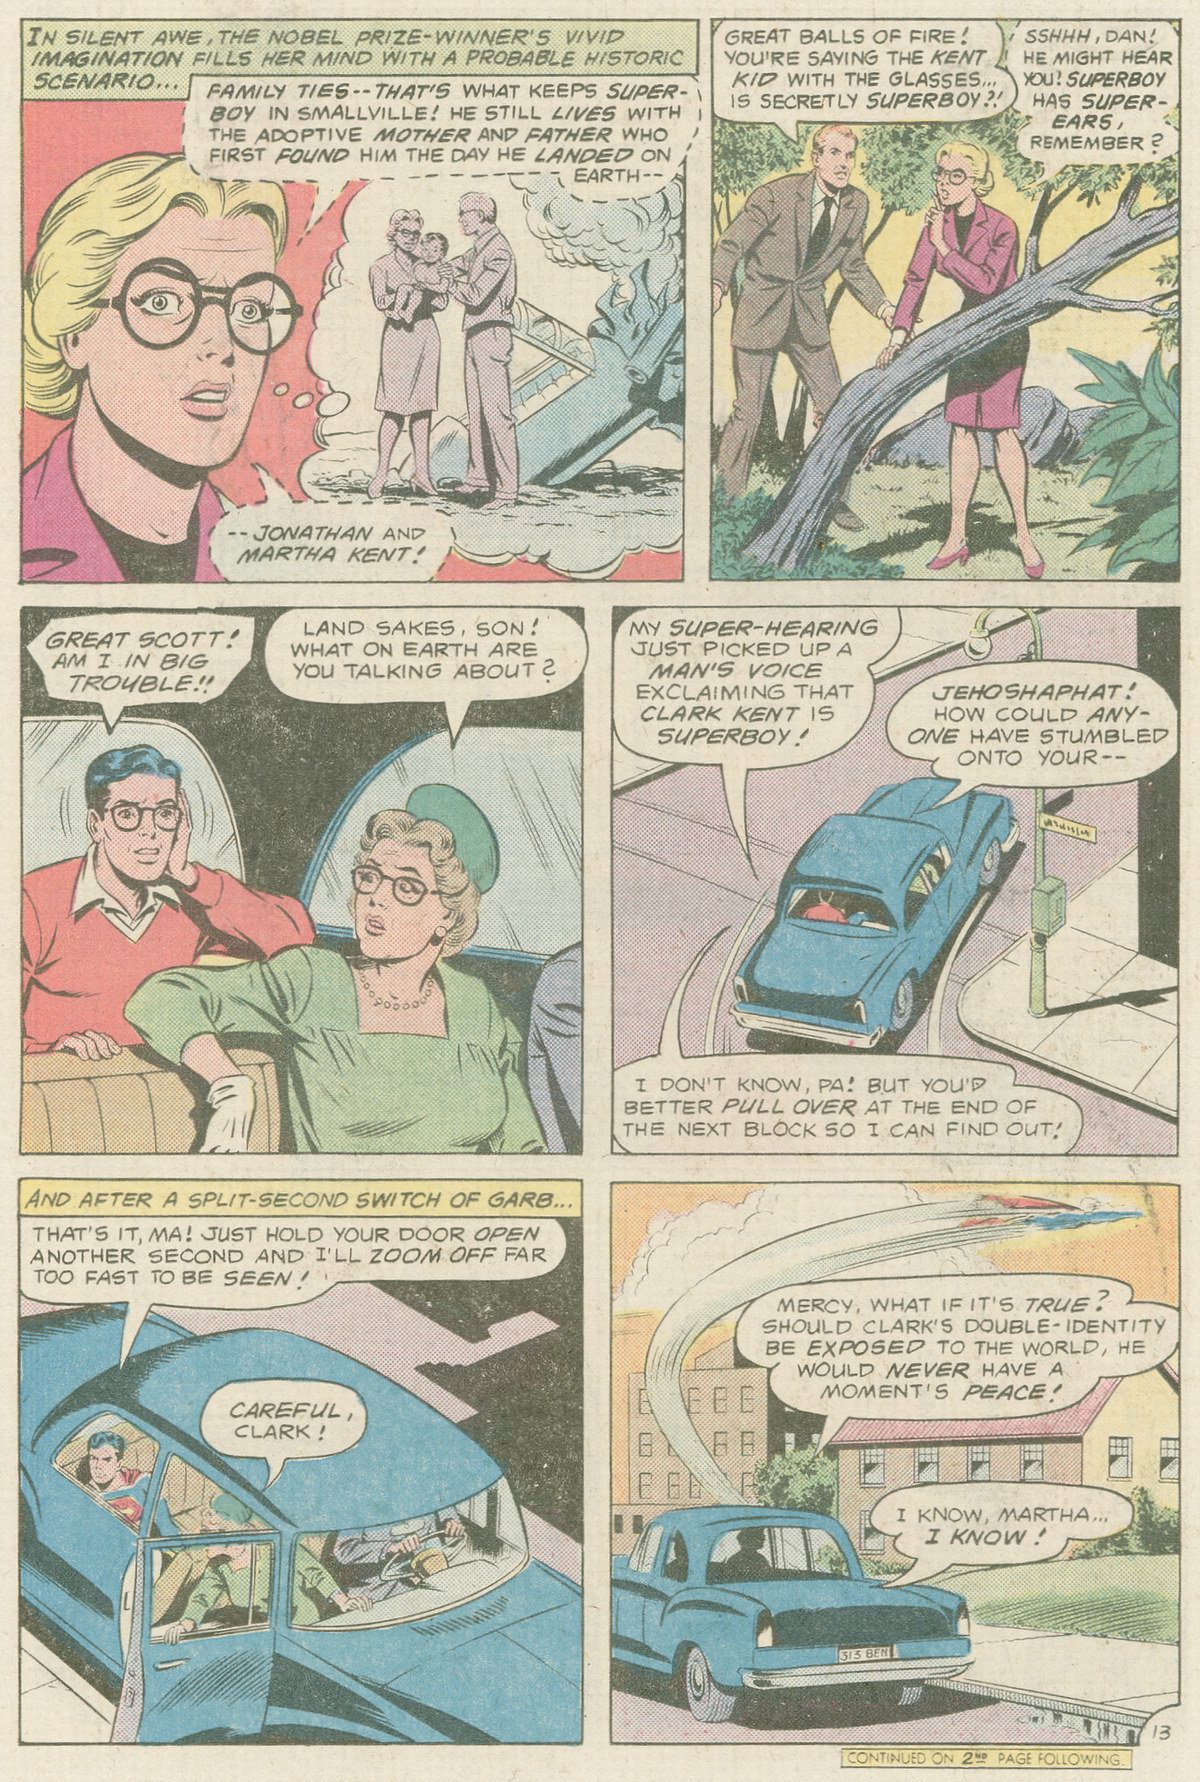 The New Adventures of Superboy 16 Page 13